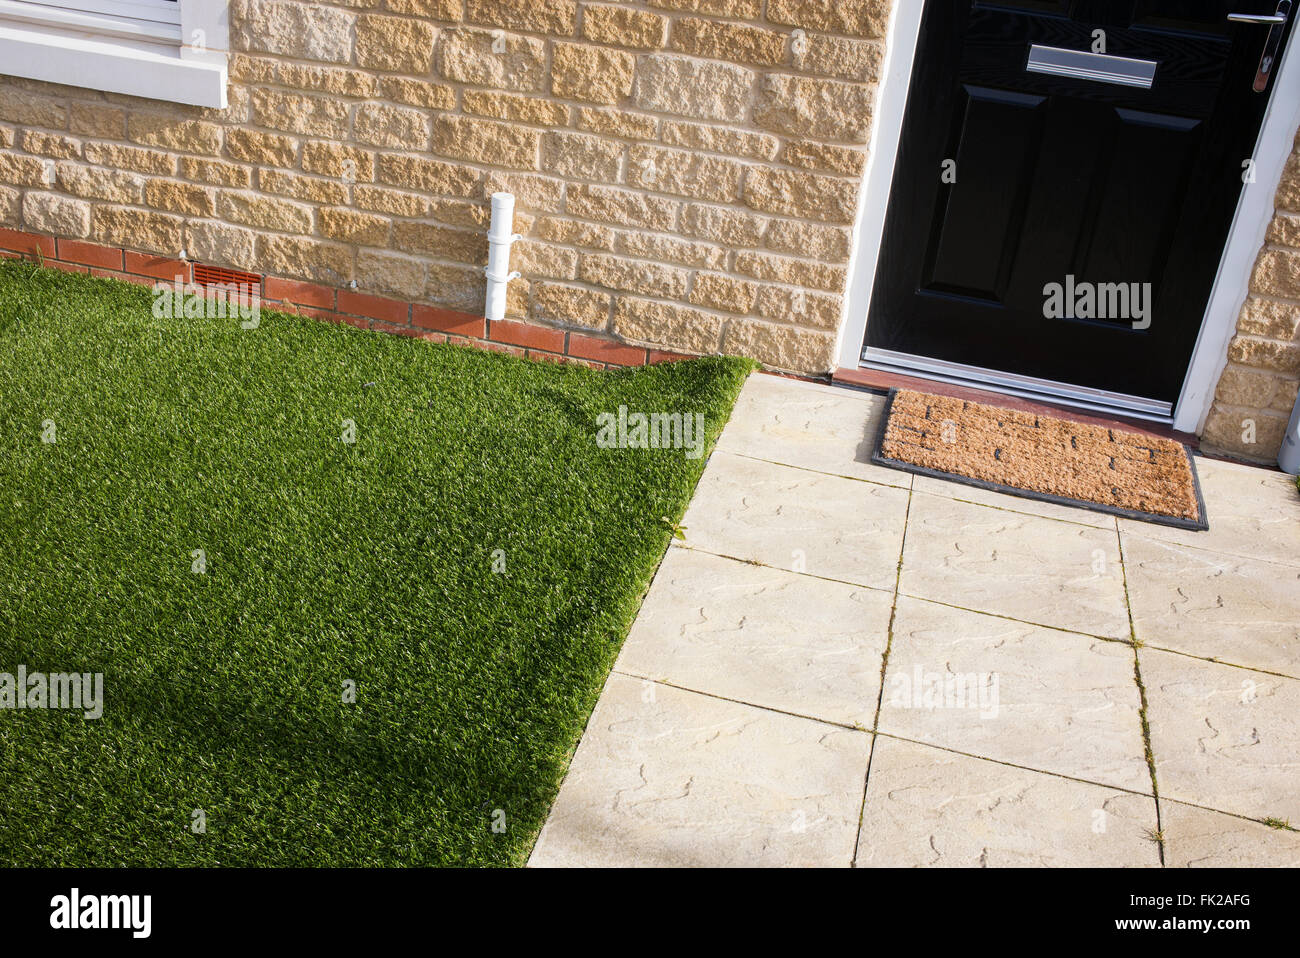 Artificial grass / astro turf meets paving slabs on a new build housing estate. Bicester, Oxfordshire, England Stock Photo